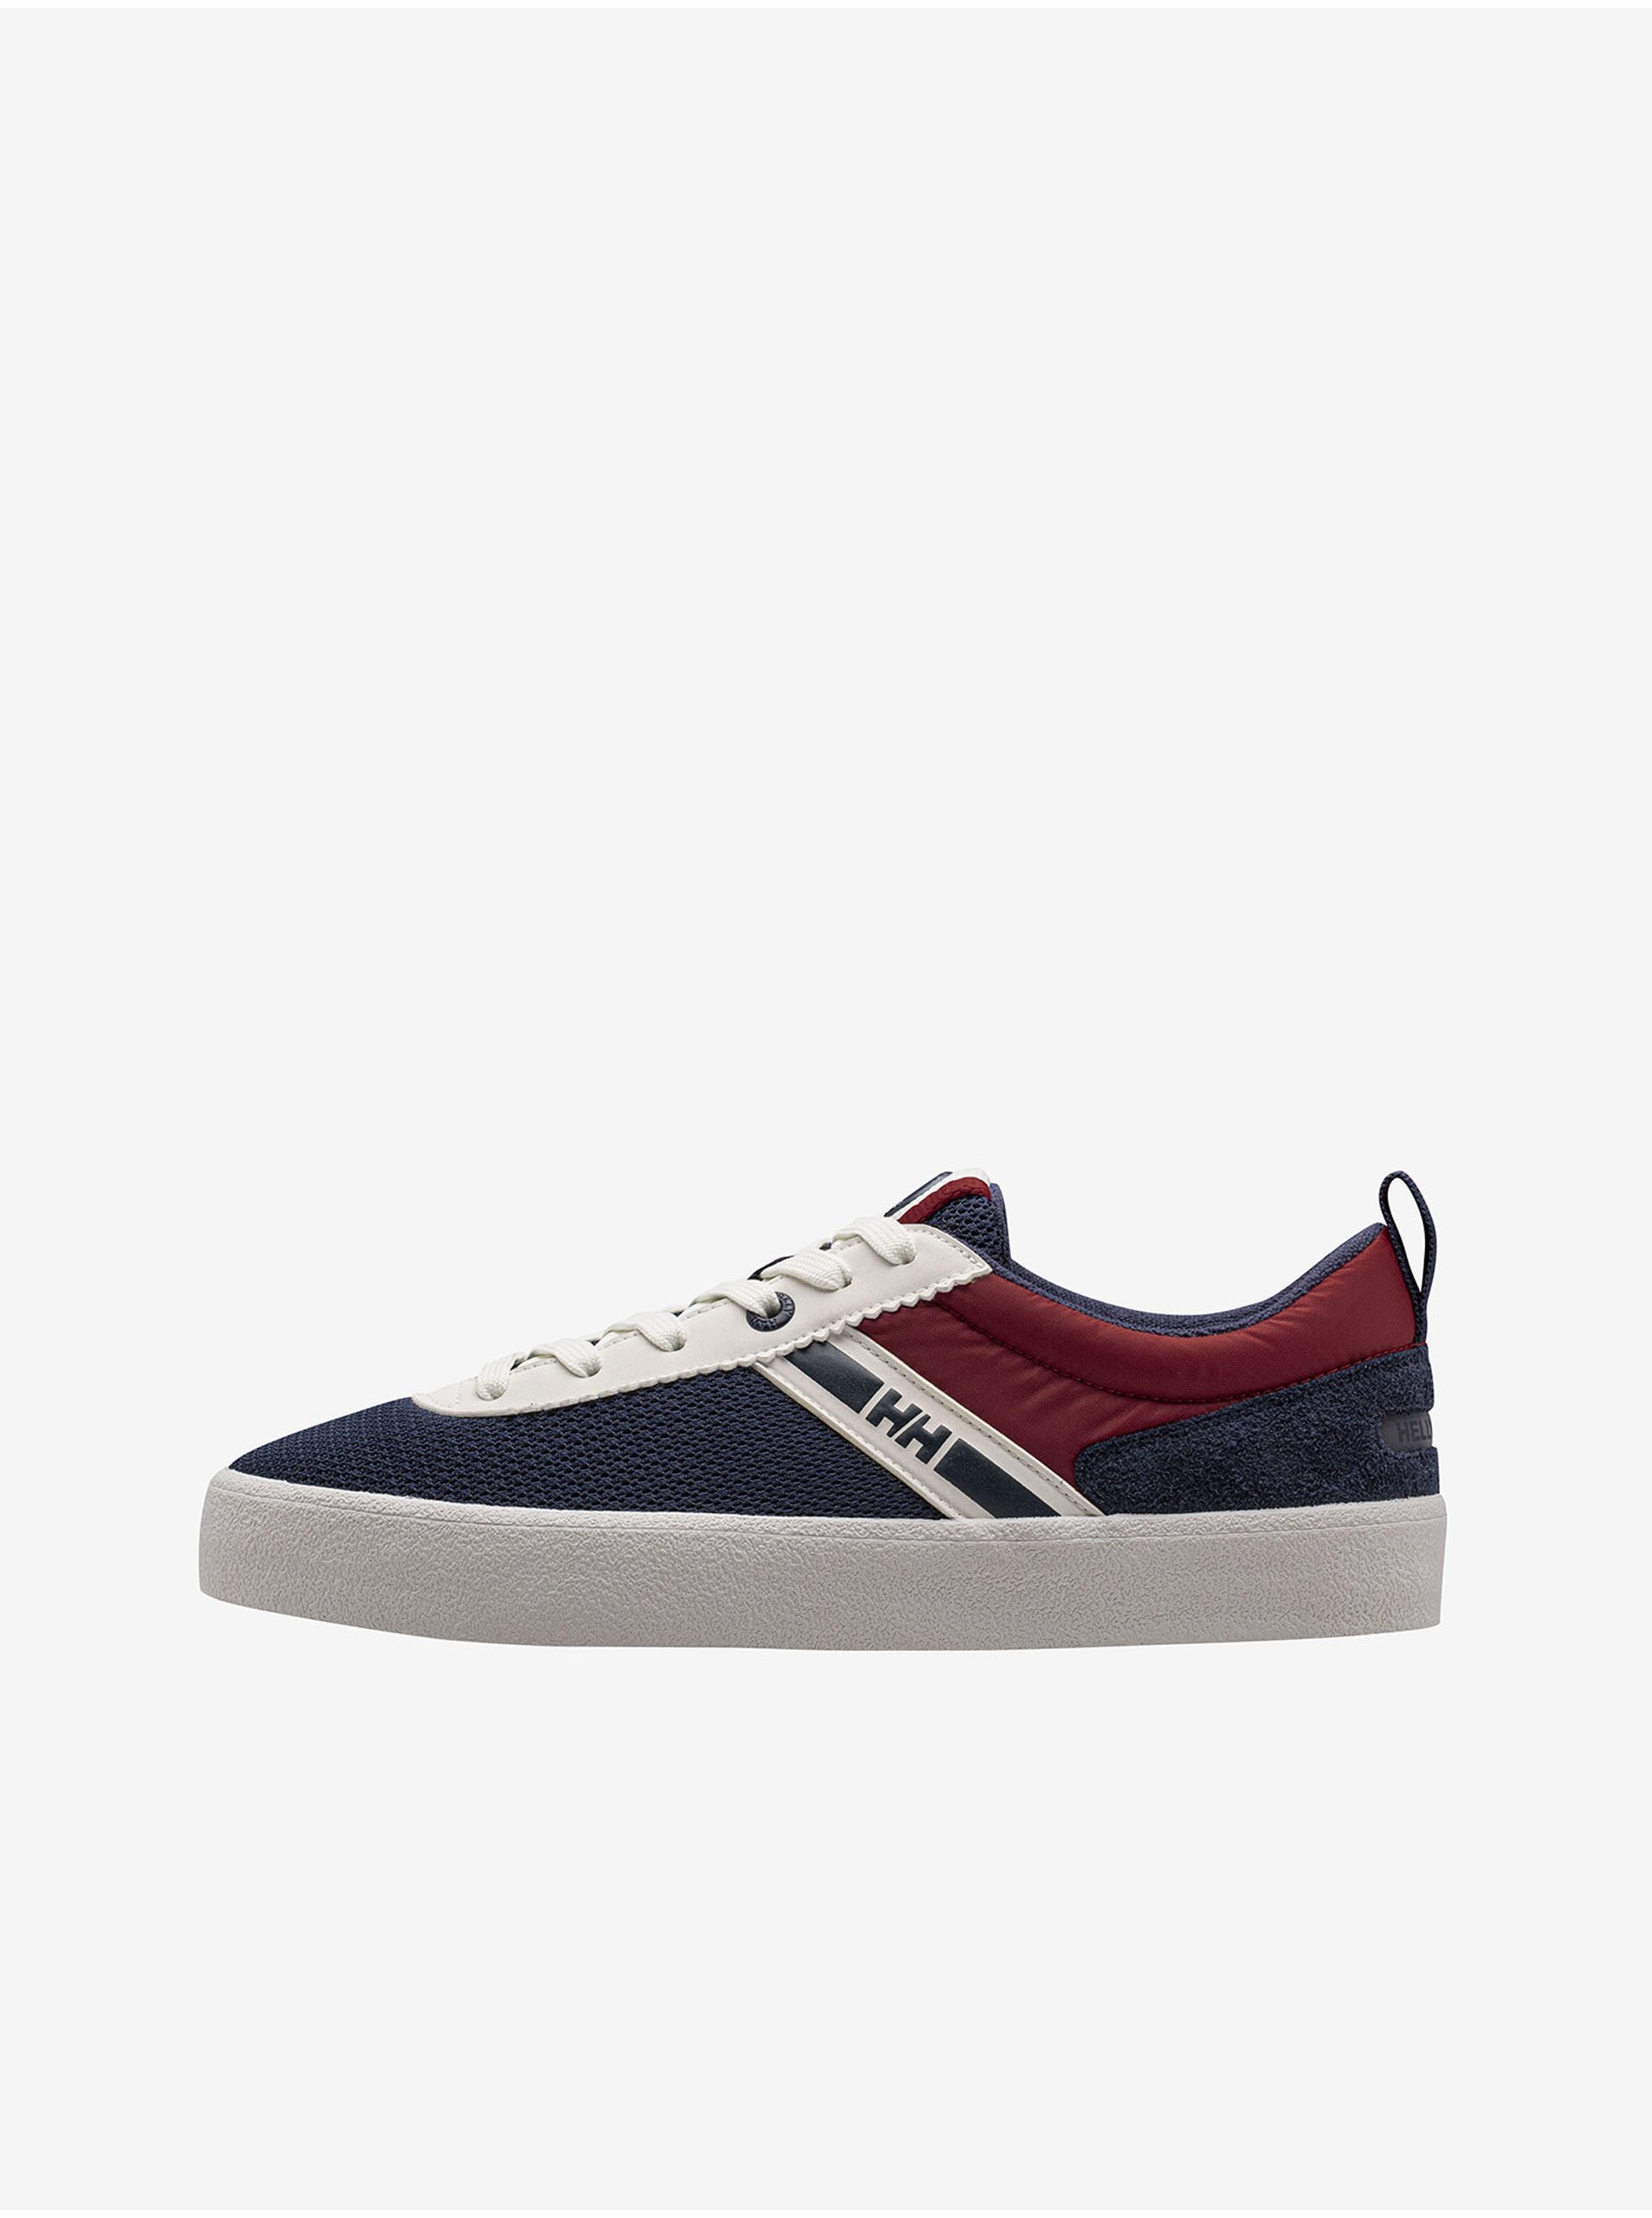 Red-blue Men's Sneakers With Suede Detail HELLY HANSEN - Men